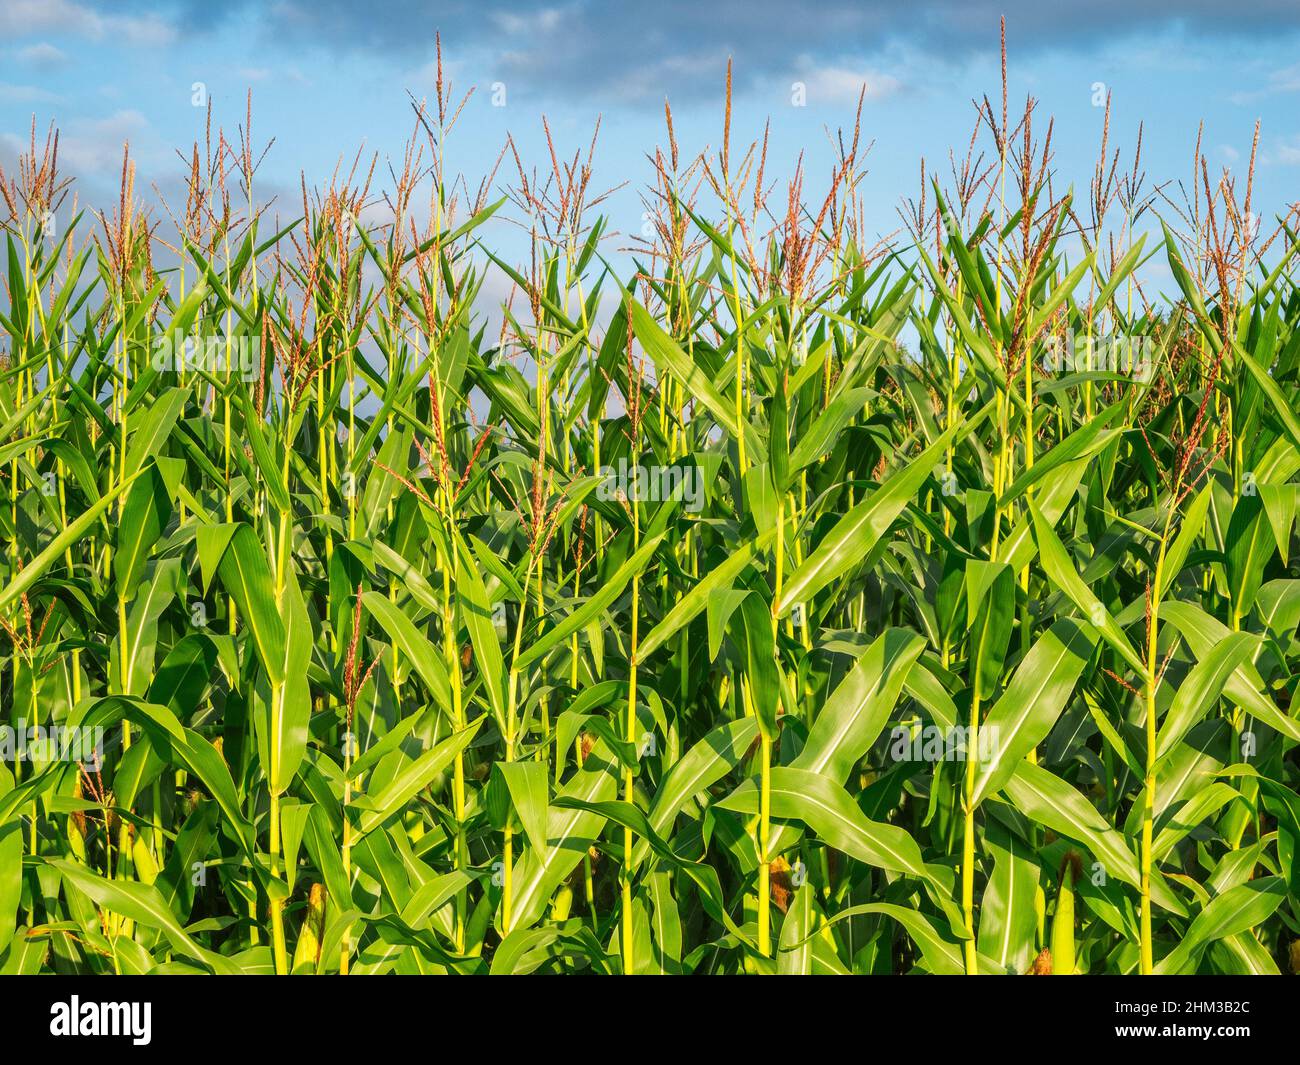 Frontal semi-close view of the upper corn plant parts at the edge of a corn field against a cloudy blue sky. Stock Photo